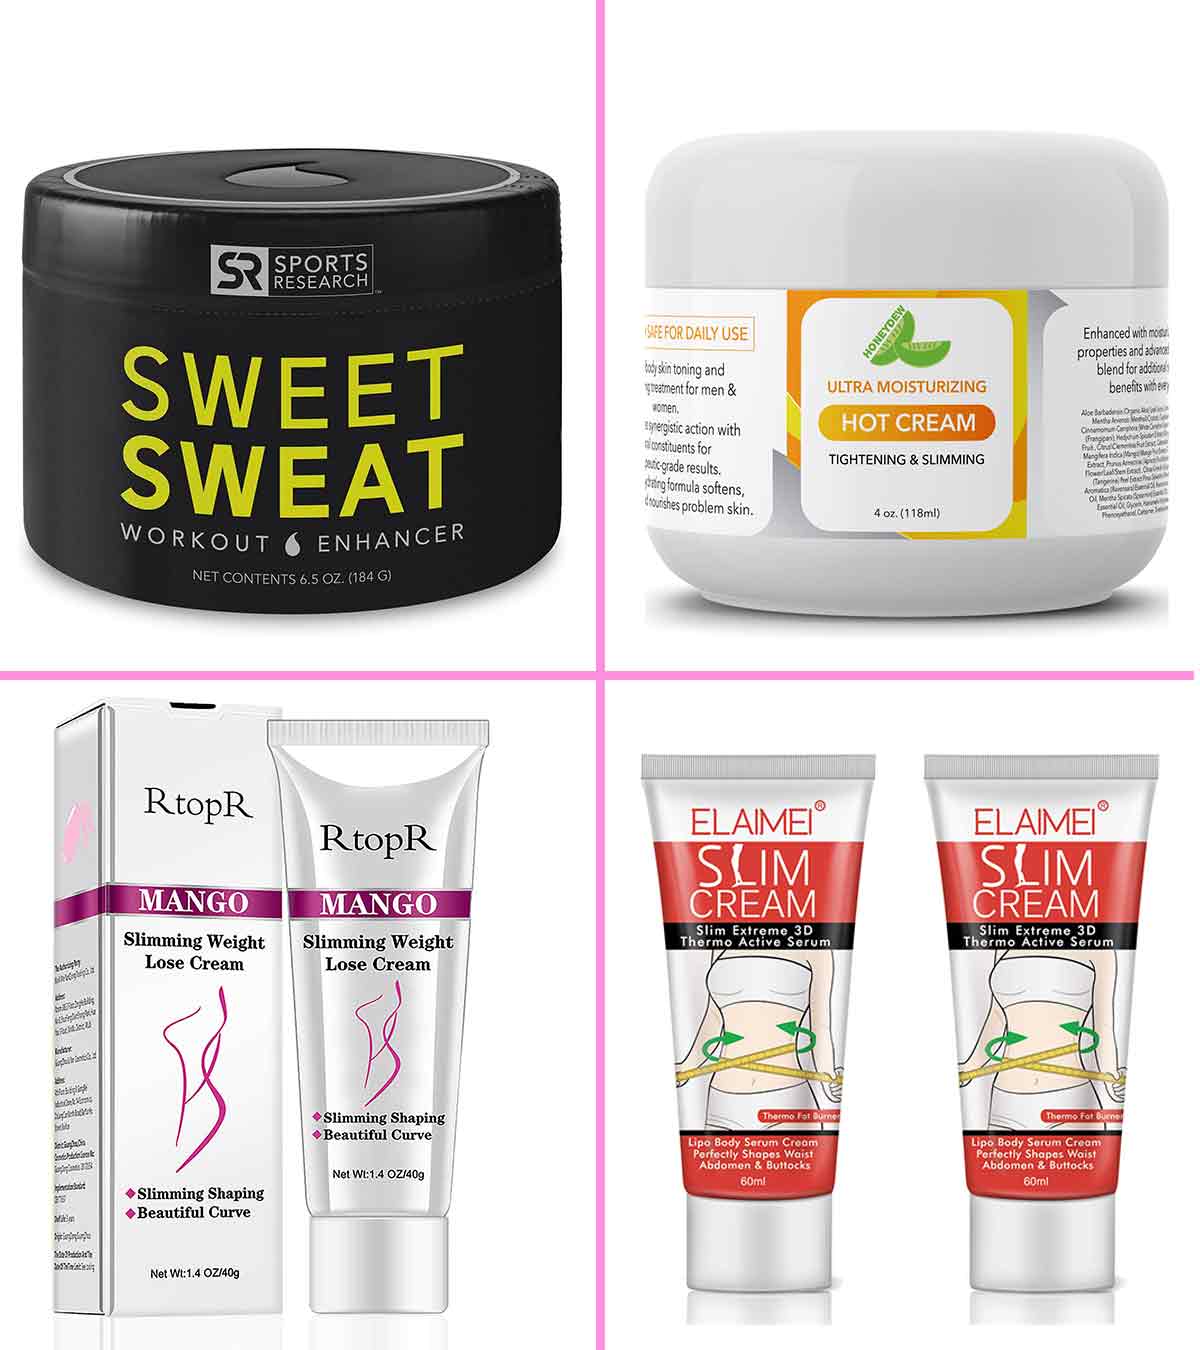 Hot Firming Lotion Sweat Enhancer - Skin Tightening Cream for Stomach Fat  and Cellulite - Sweat Cream for Better Workout Results - Long Lasting